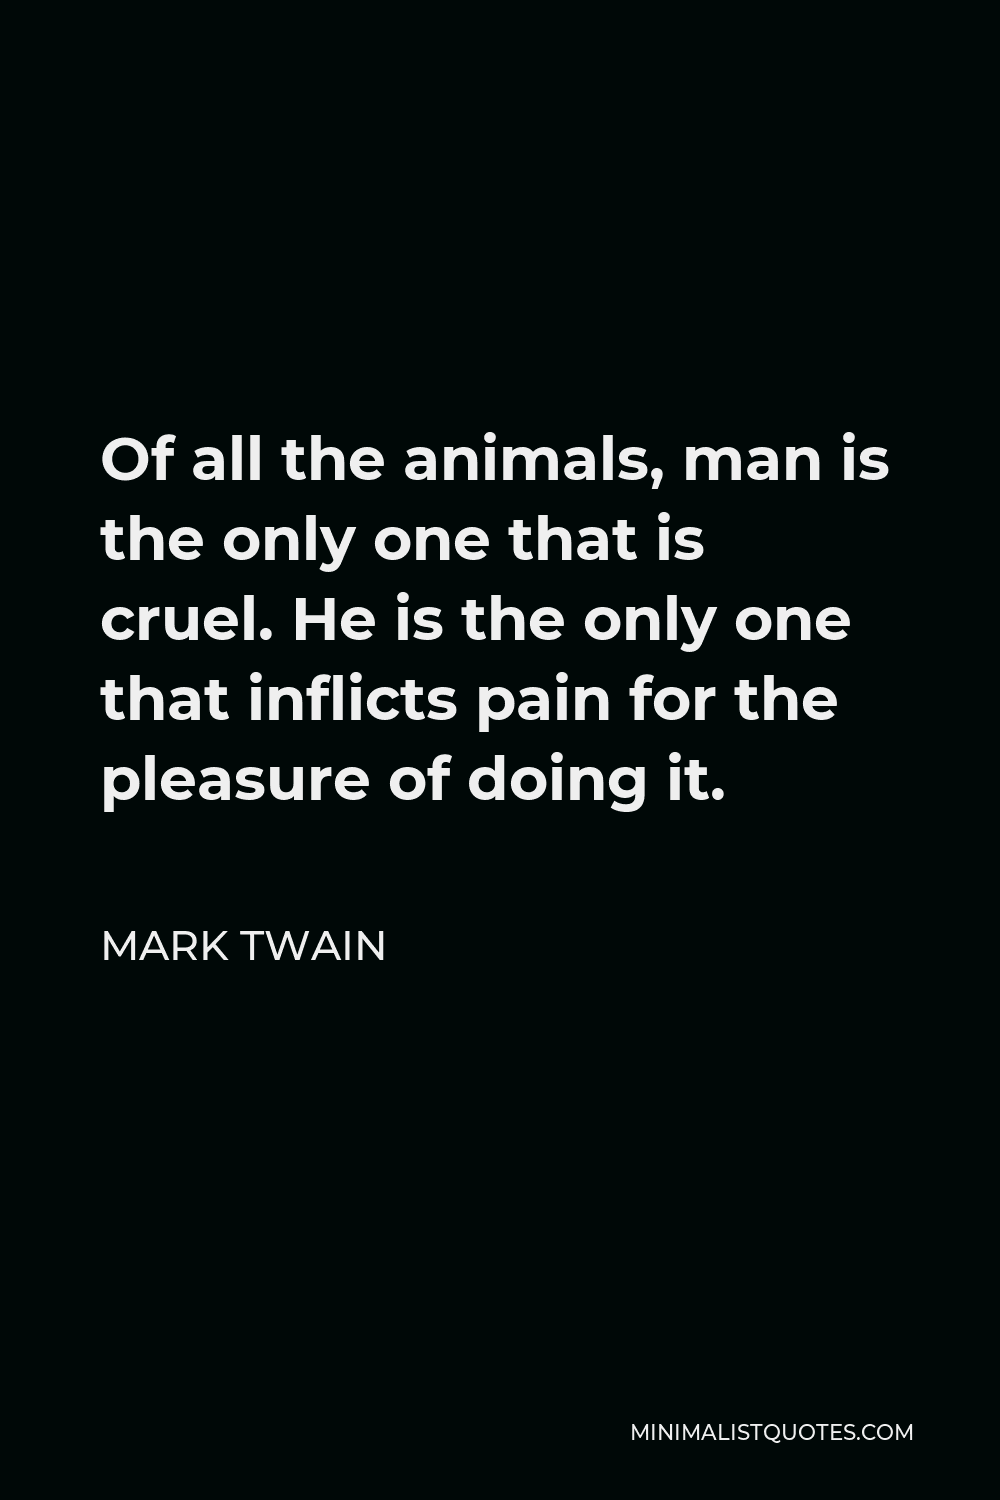 Mark Twain Quote: Of all the animals, man is the only one that is cruel. He  is the only one that inflicts pain for the pleasure of doing it.